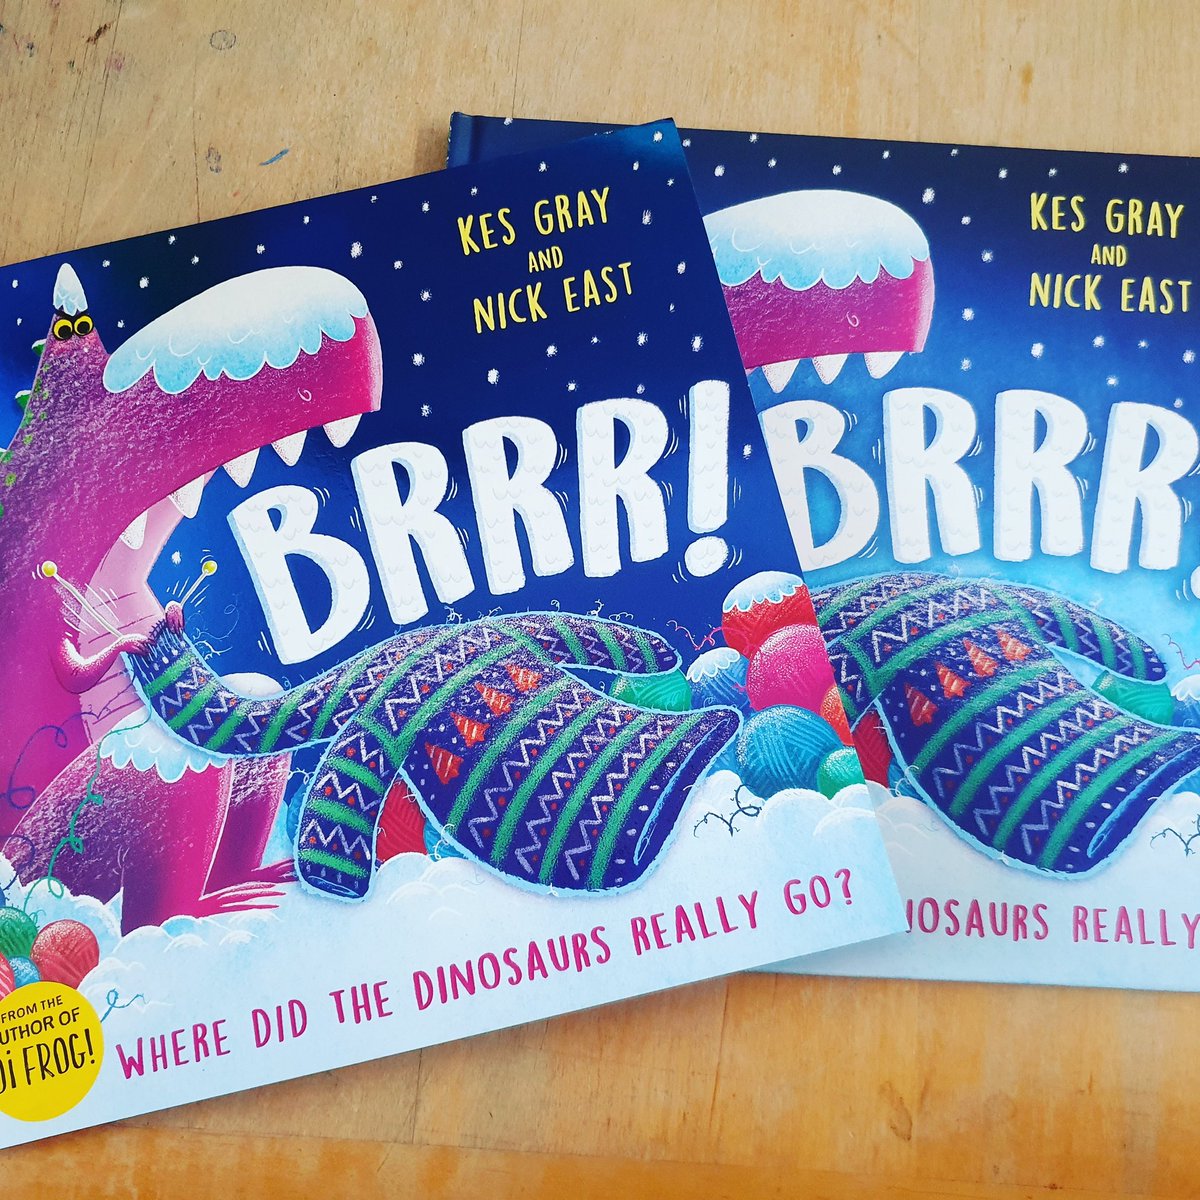 This bonkers dino book by #kesgray and published by @HachetteKids, is out in hardback today. To celebrate I'm giving away two signed copies #Giveaways like & RT to win a copy. Goodluck! Oh BTW, pictures are by me :-)